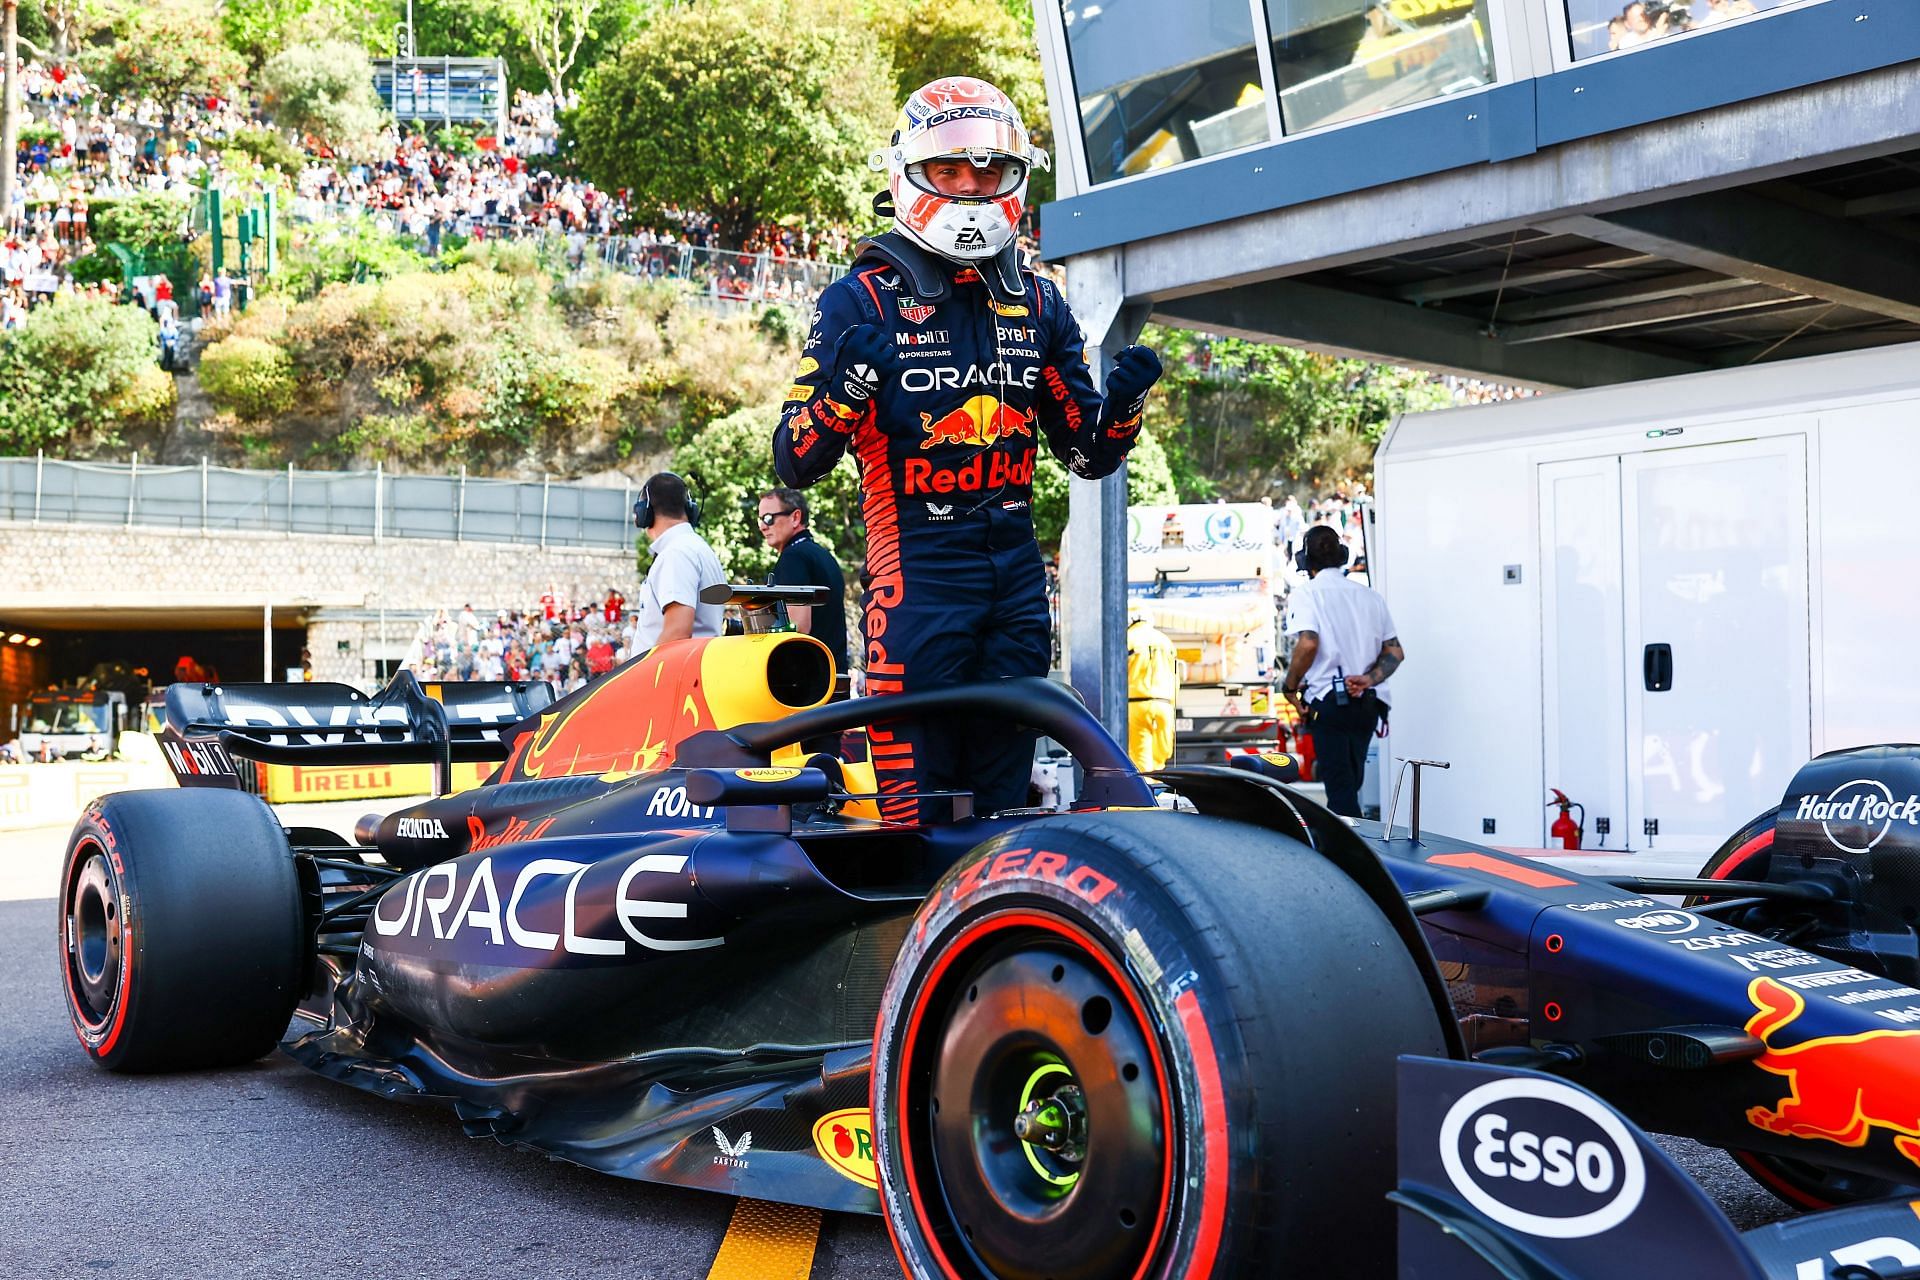 Red Bull driver Max Verstappen celebrates after claiming pole position for the 2023 F1 Monaco GP. (Photo by Mark Thompson/Getty Images)